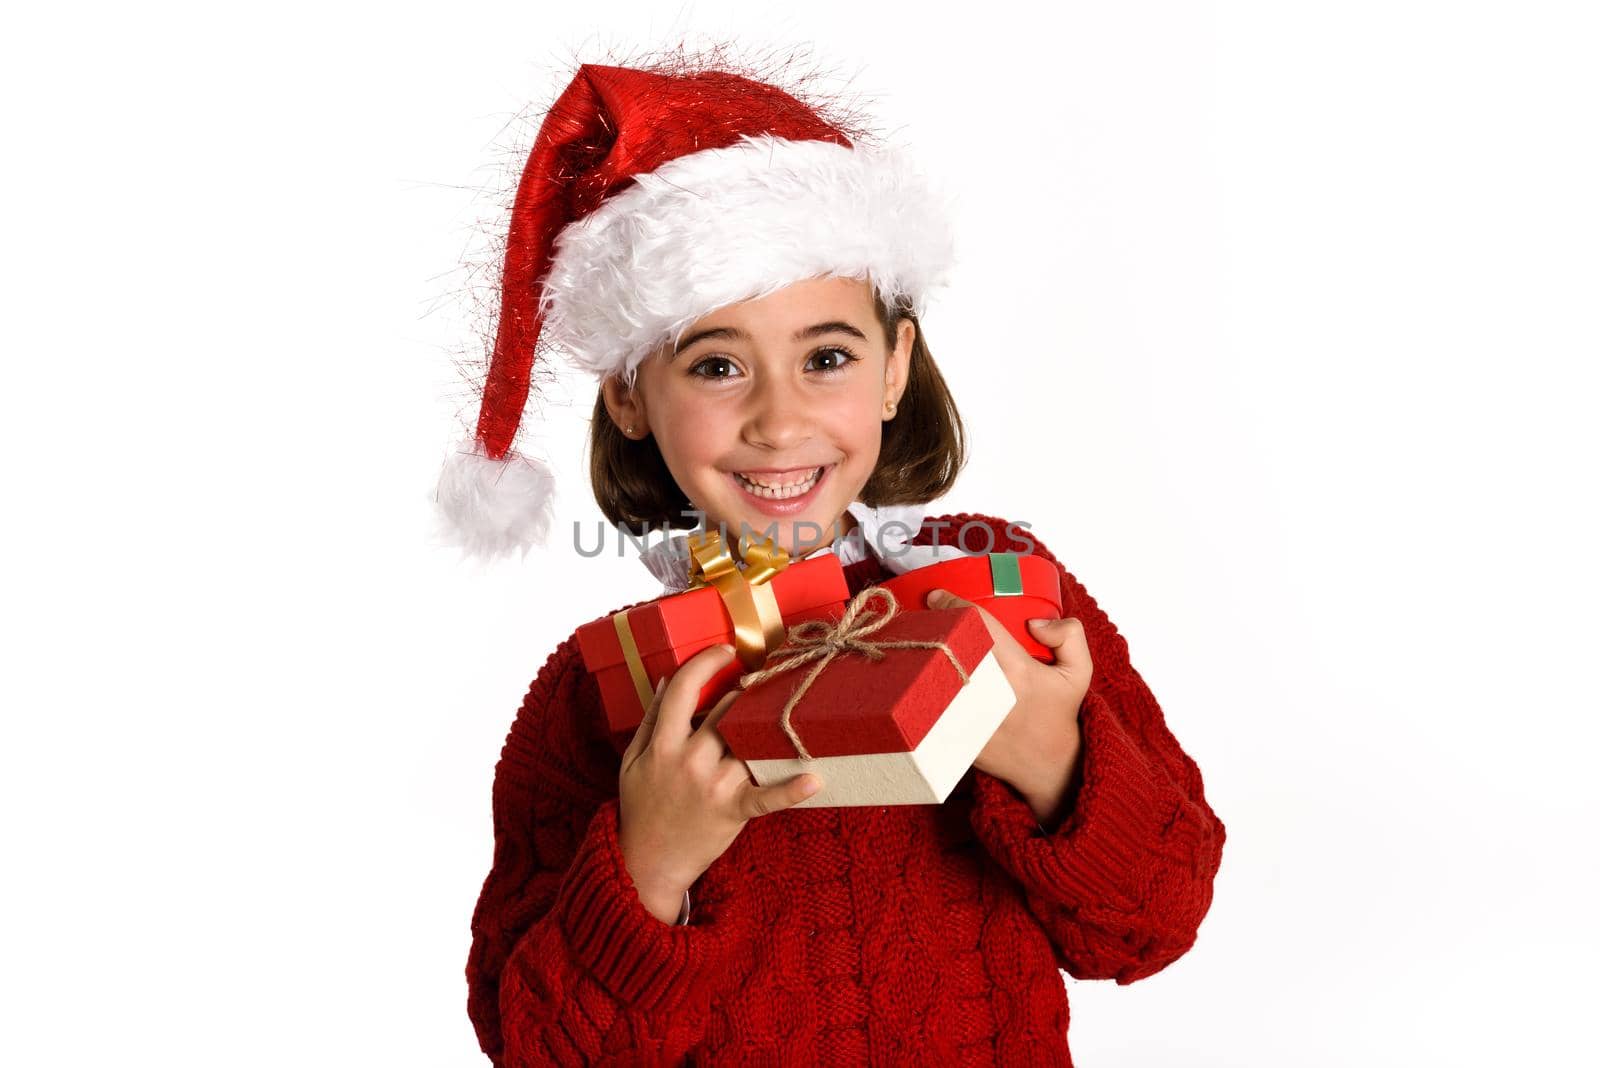 Little girl wearing santa hat carrying many gift boxes for Christmas on white background